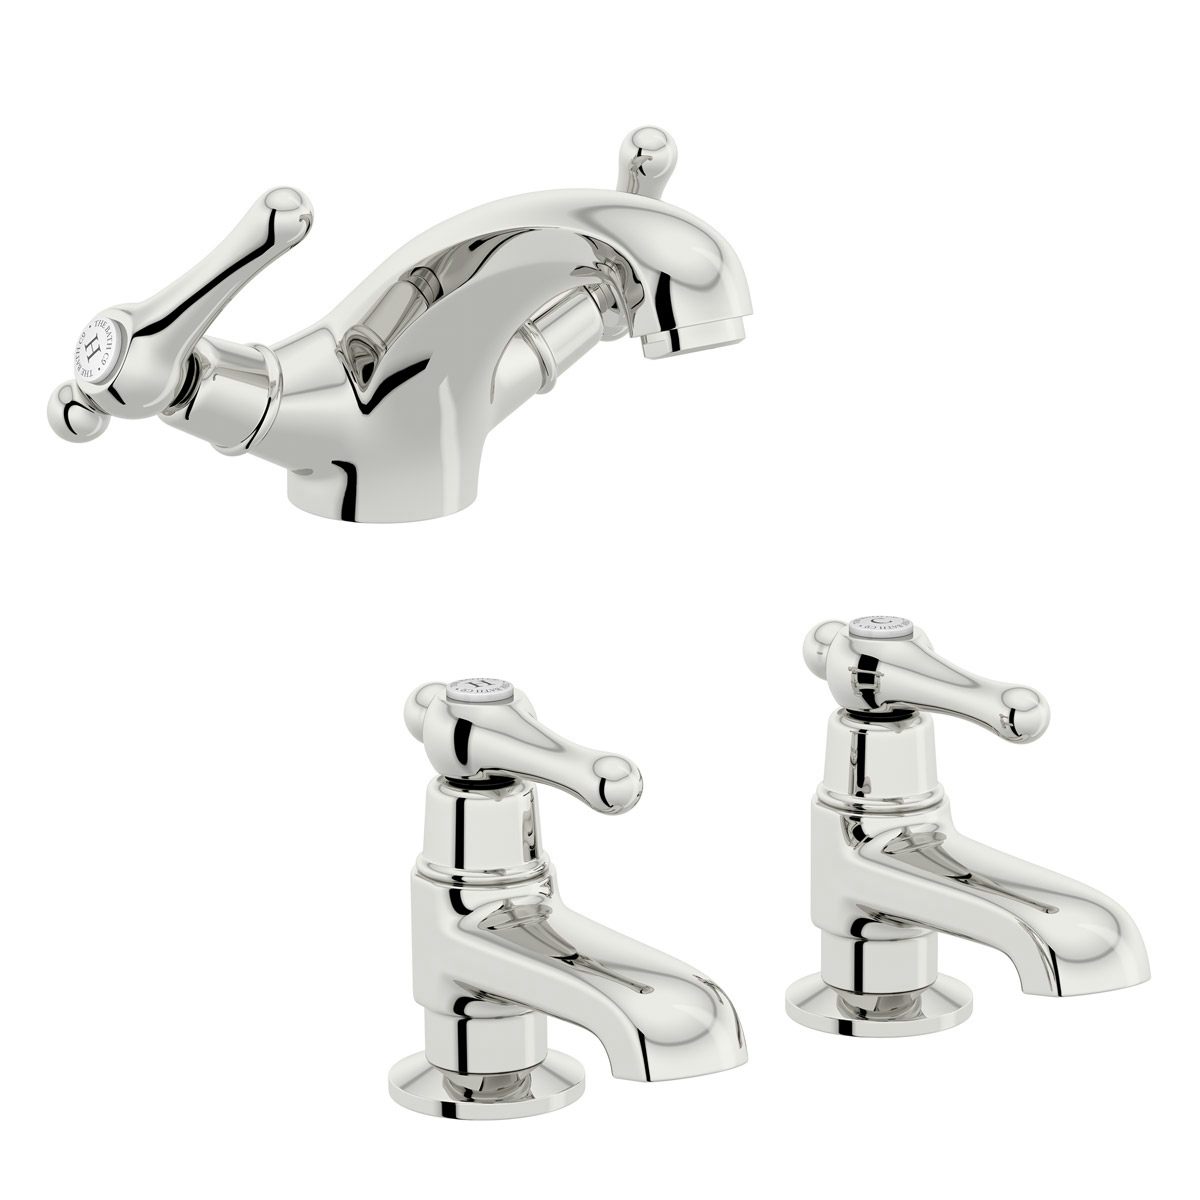 The Bath Co. Camberley lever basin mixer and bath pillar tap pack